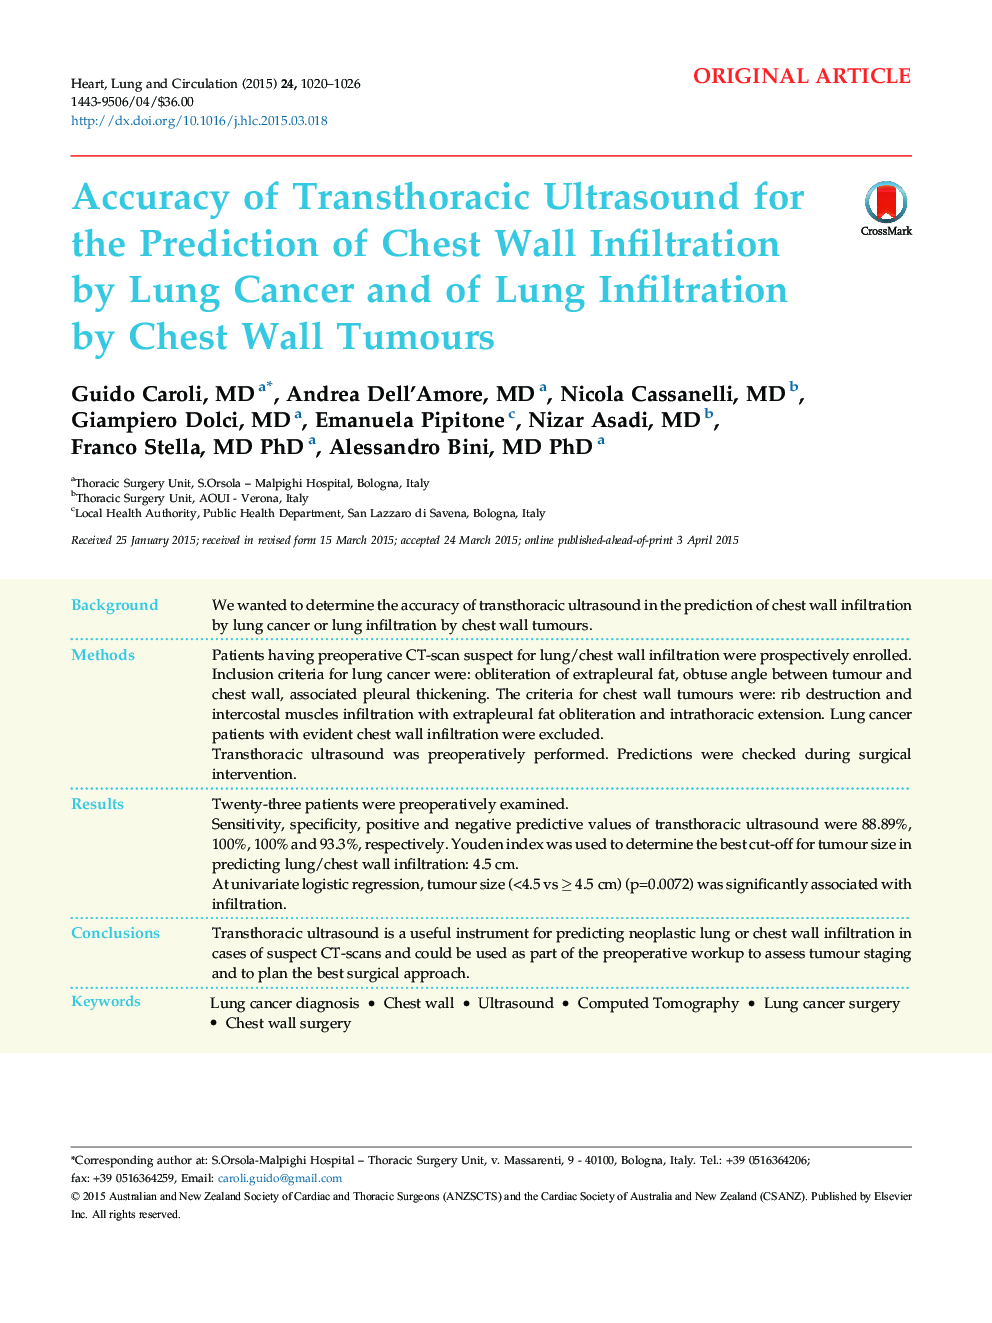 Accuracy of Transthoracic Ultrasound for the Prediction of Chest Wall Infiltration by Lung Cancer and of Lung Infiltration by Chest Wall Tumours